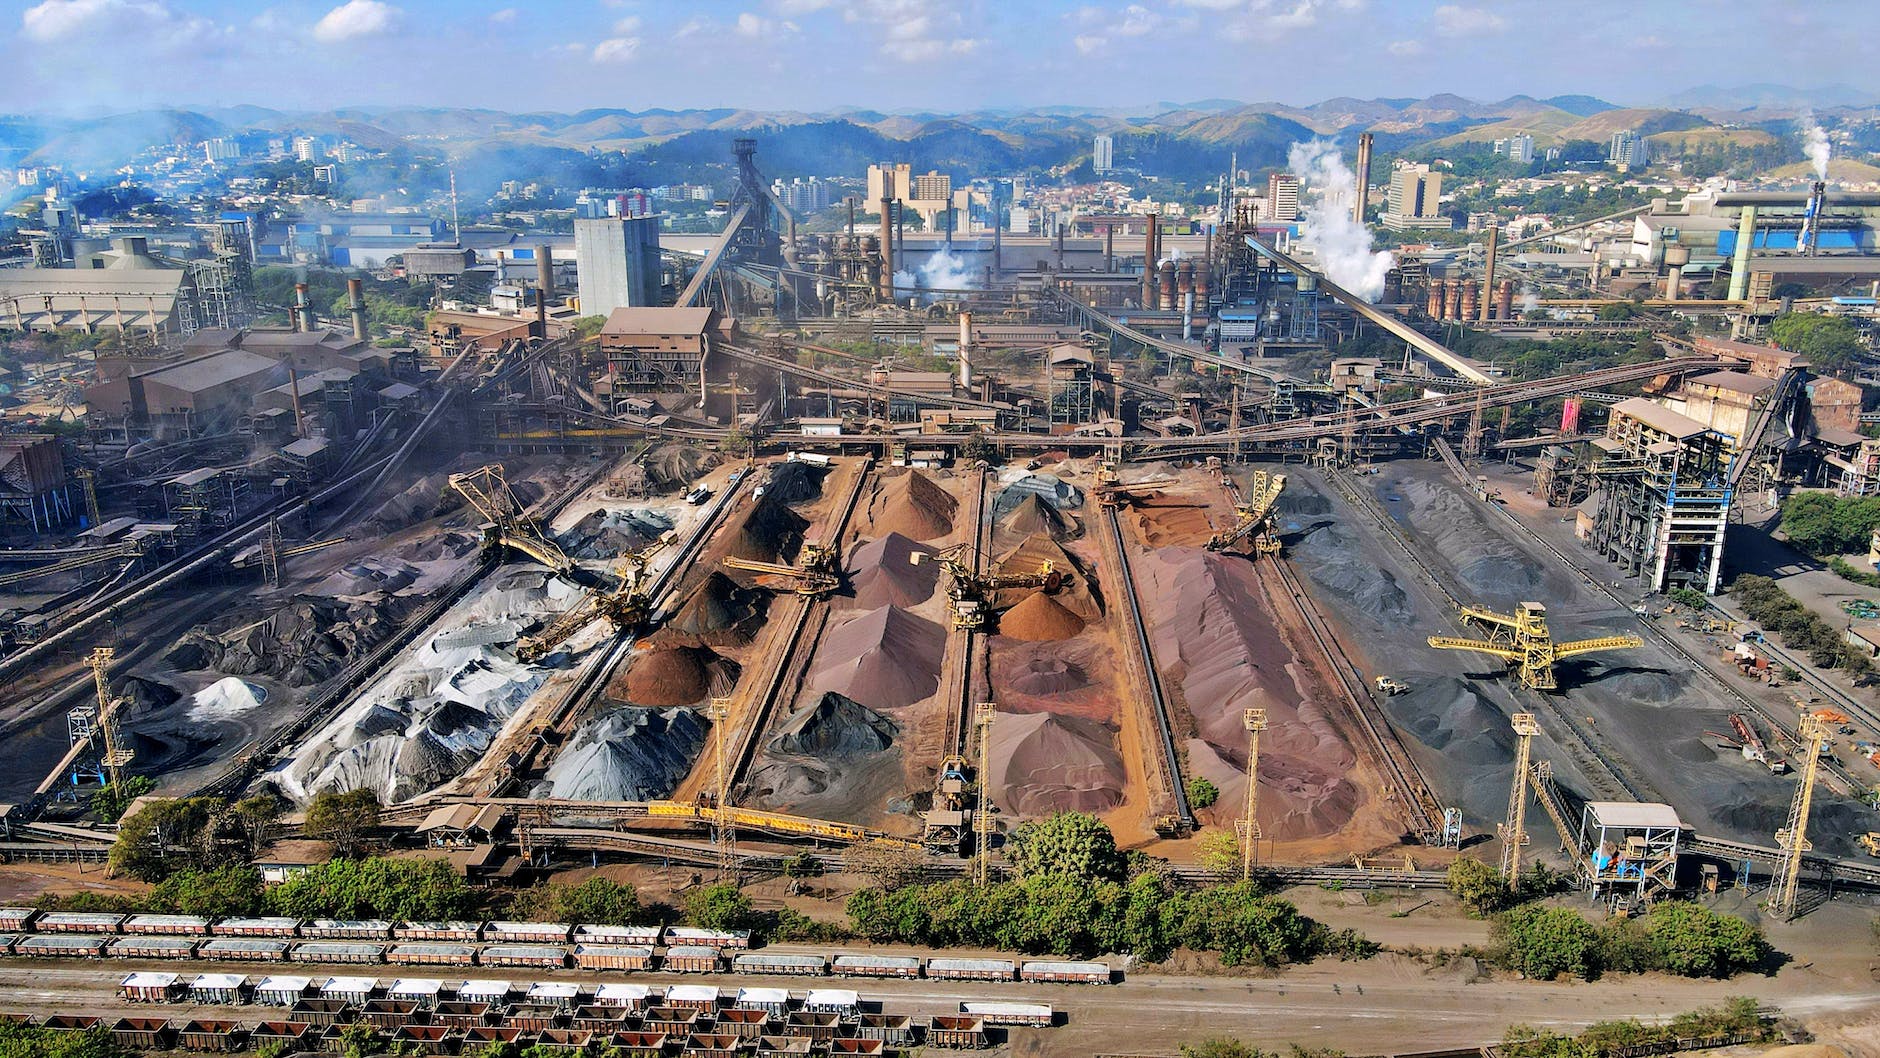 high angle view of an industrial landscape with slag heaps and cranes